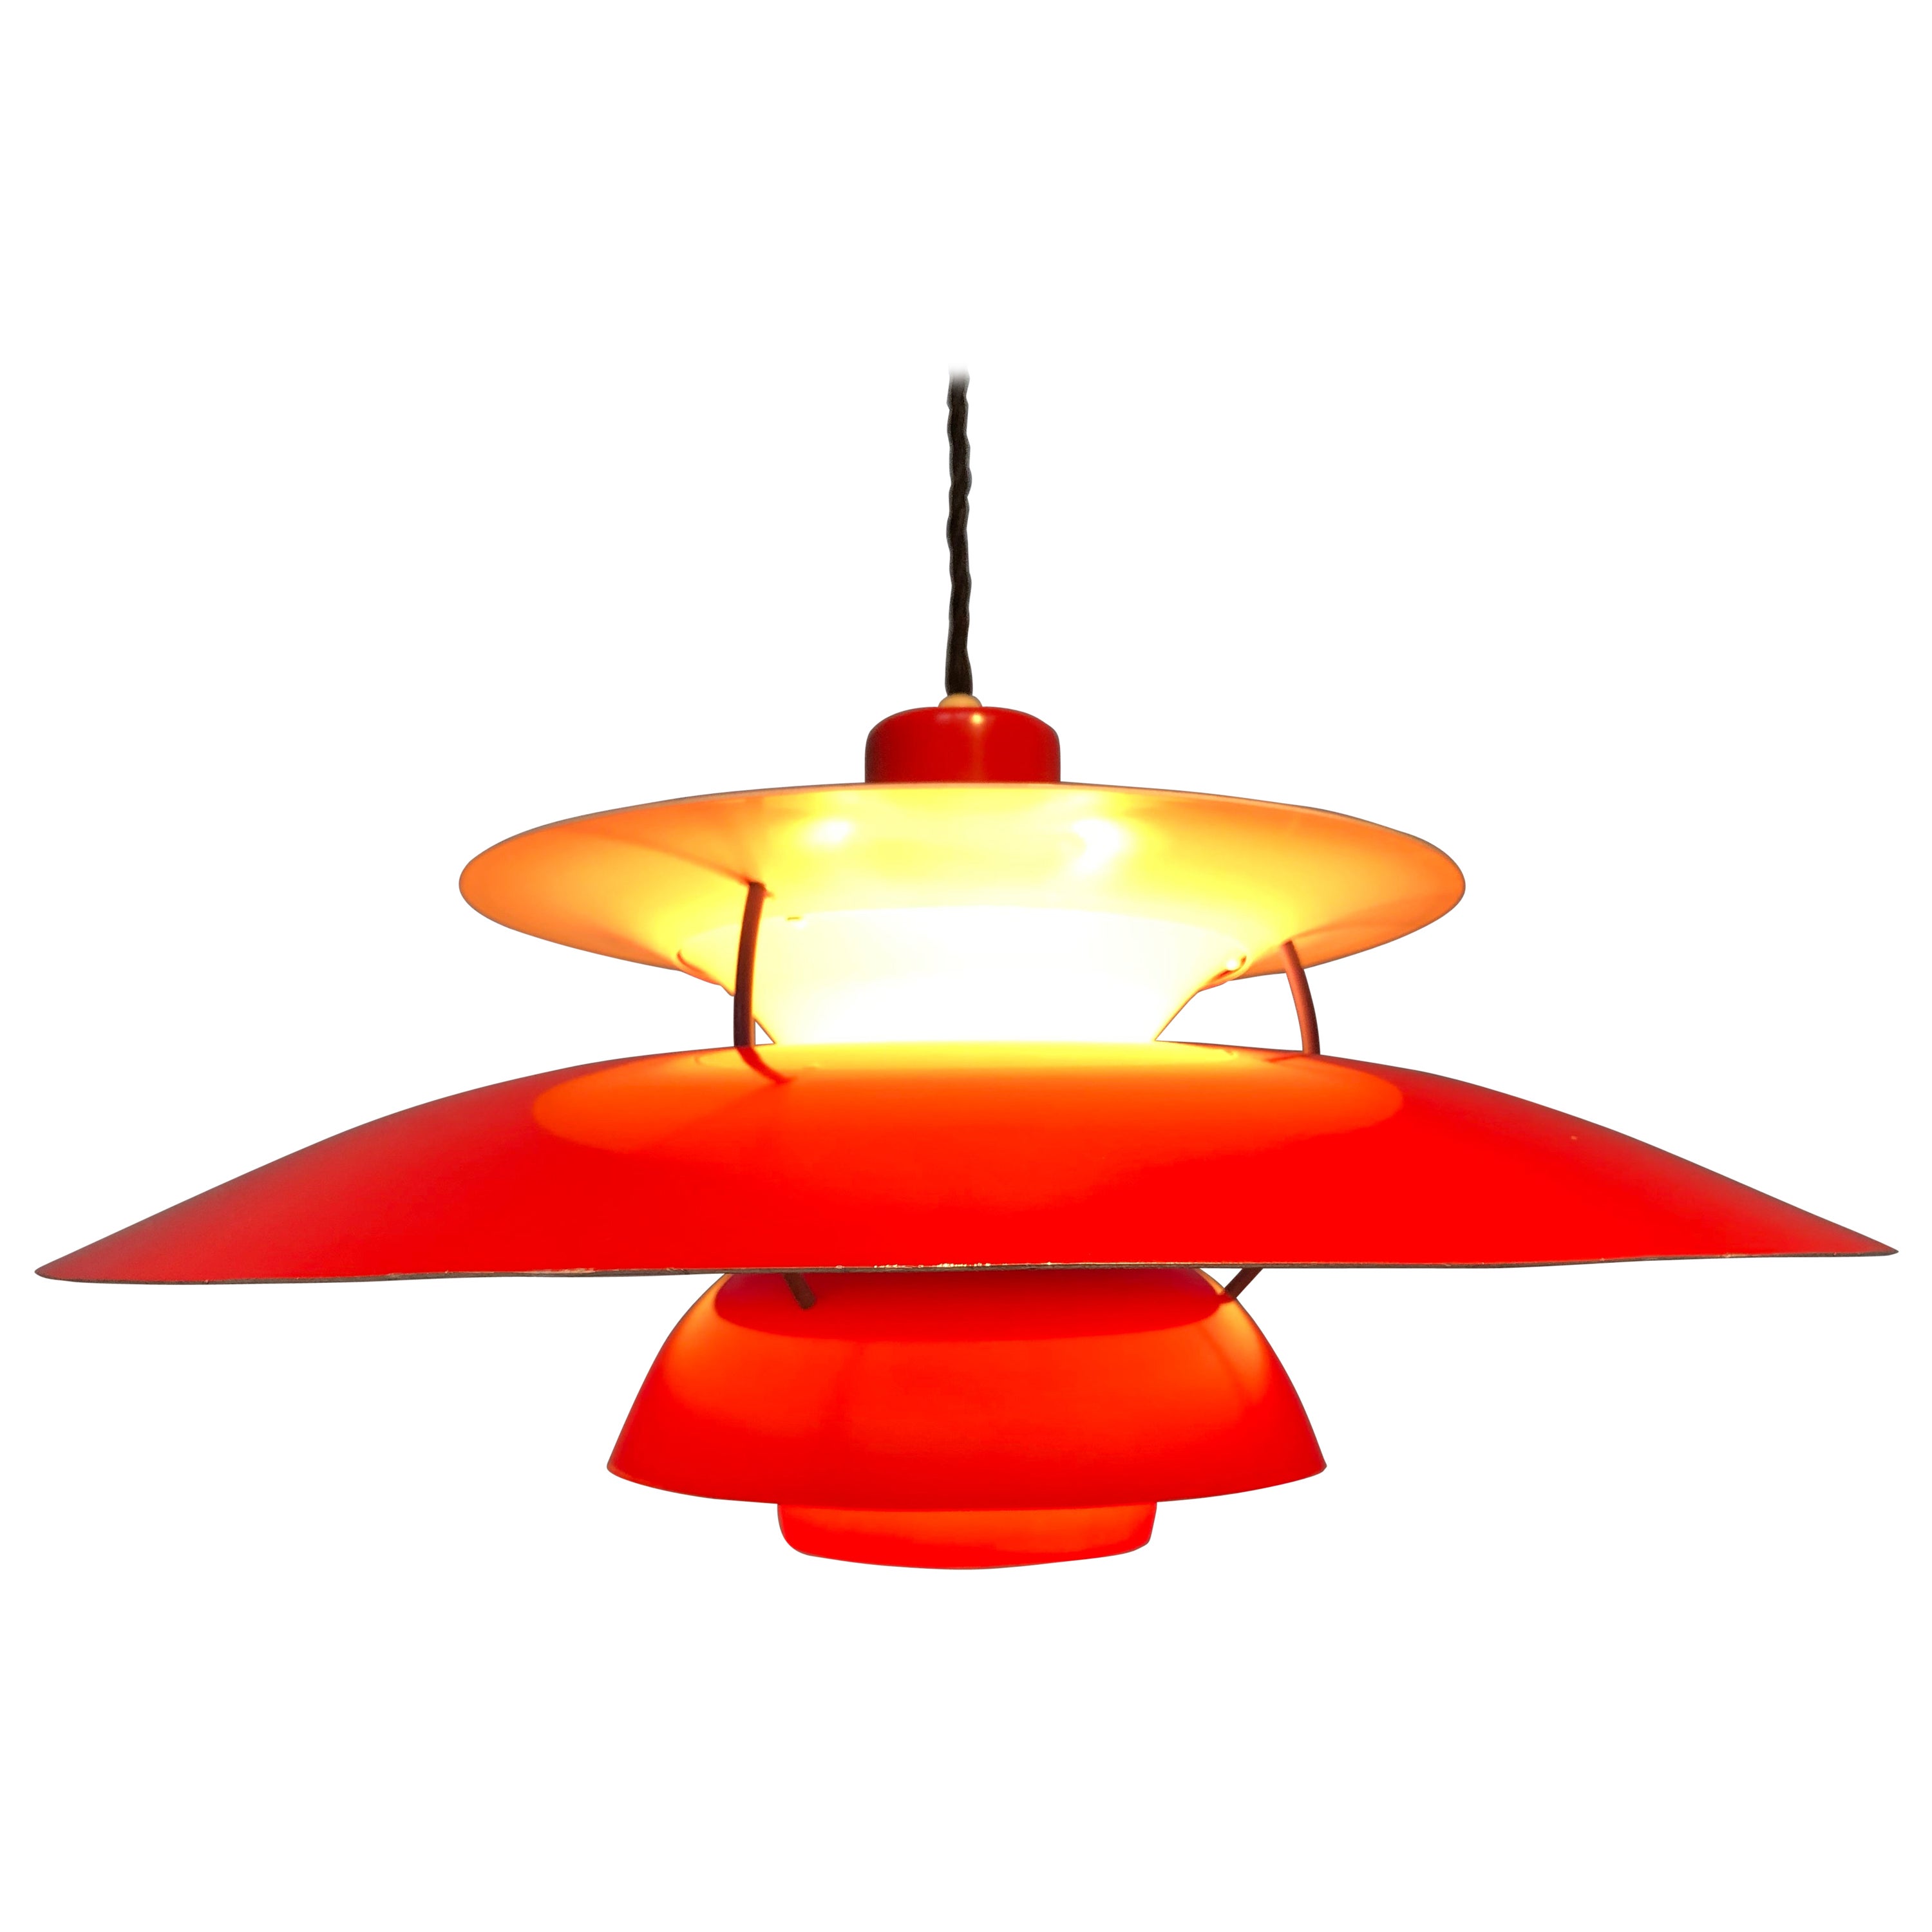 Iconic Rare 1st Edition Poul Henningsen PH 5 Chandelier Pendant Lamp from 1959